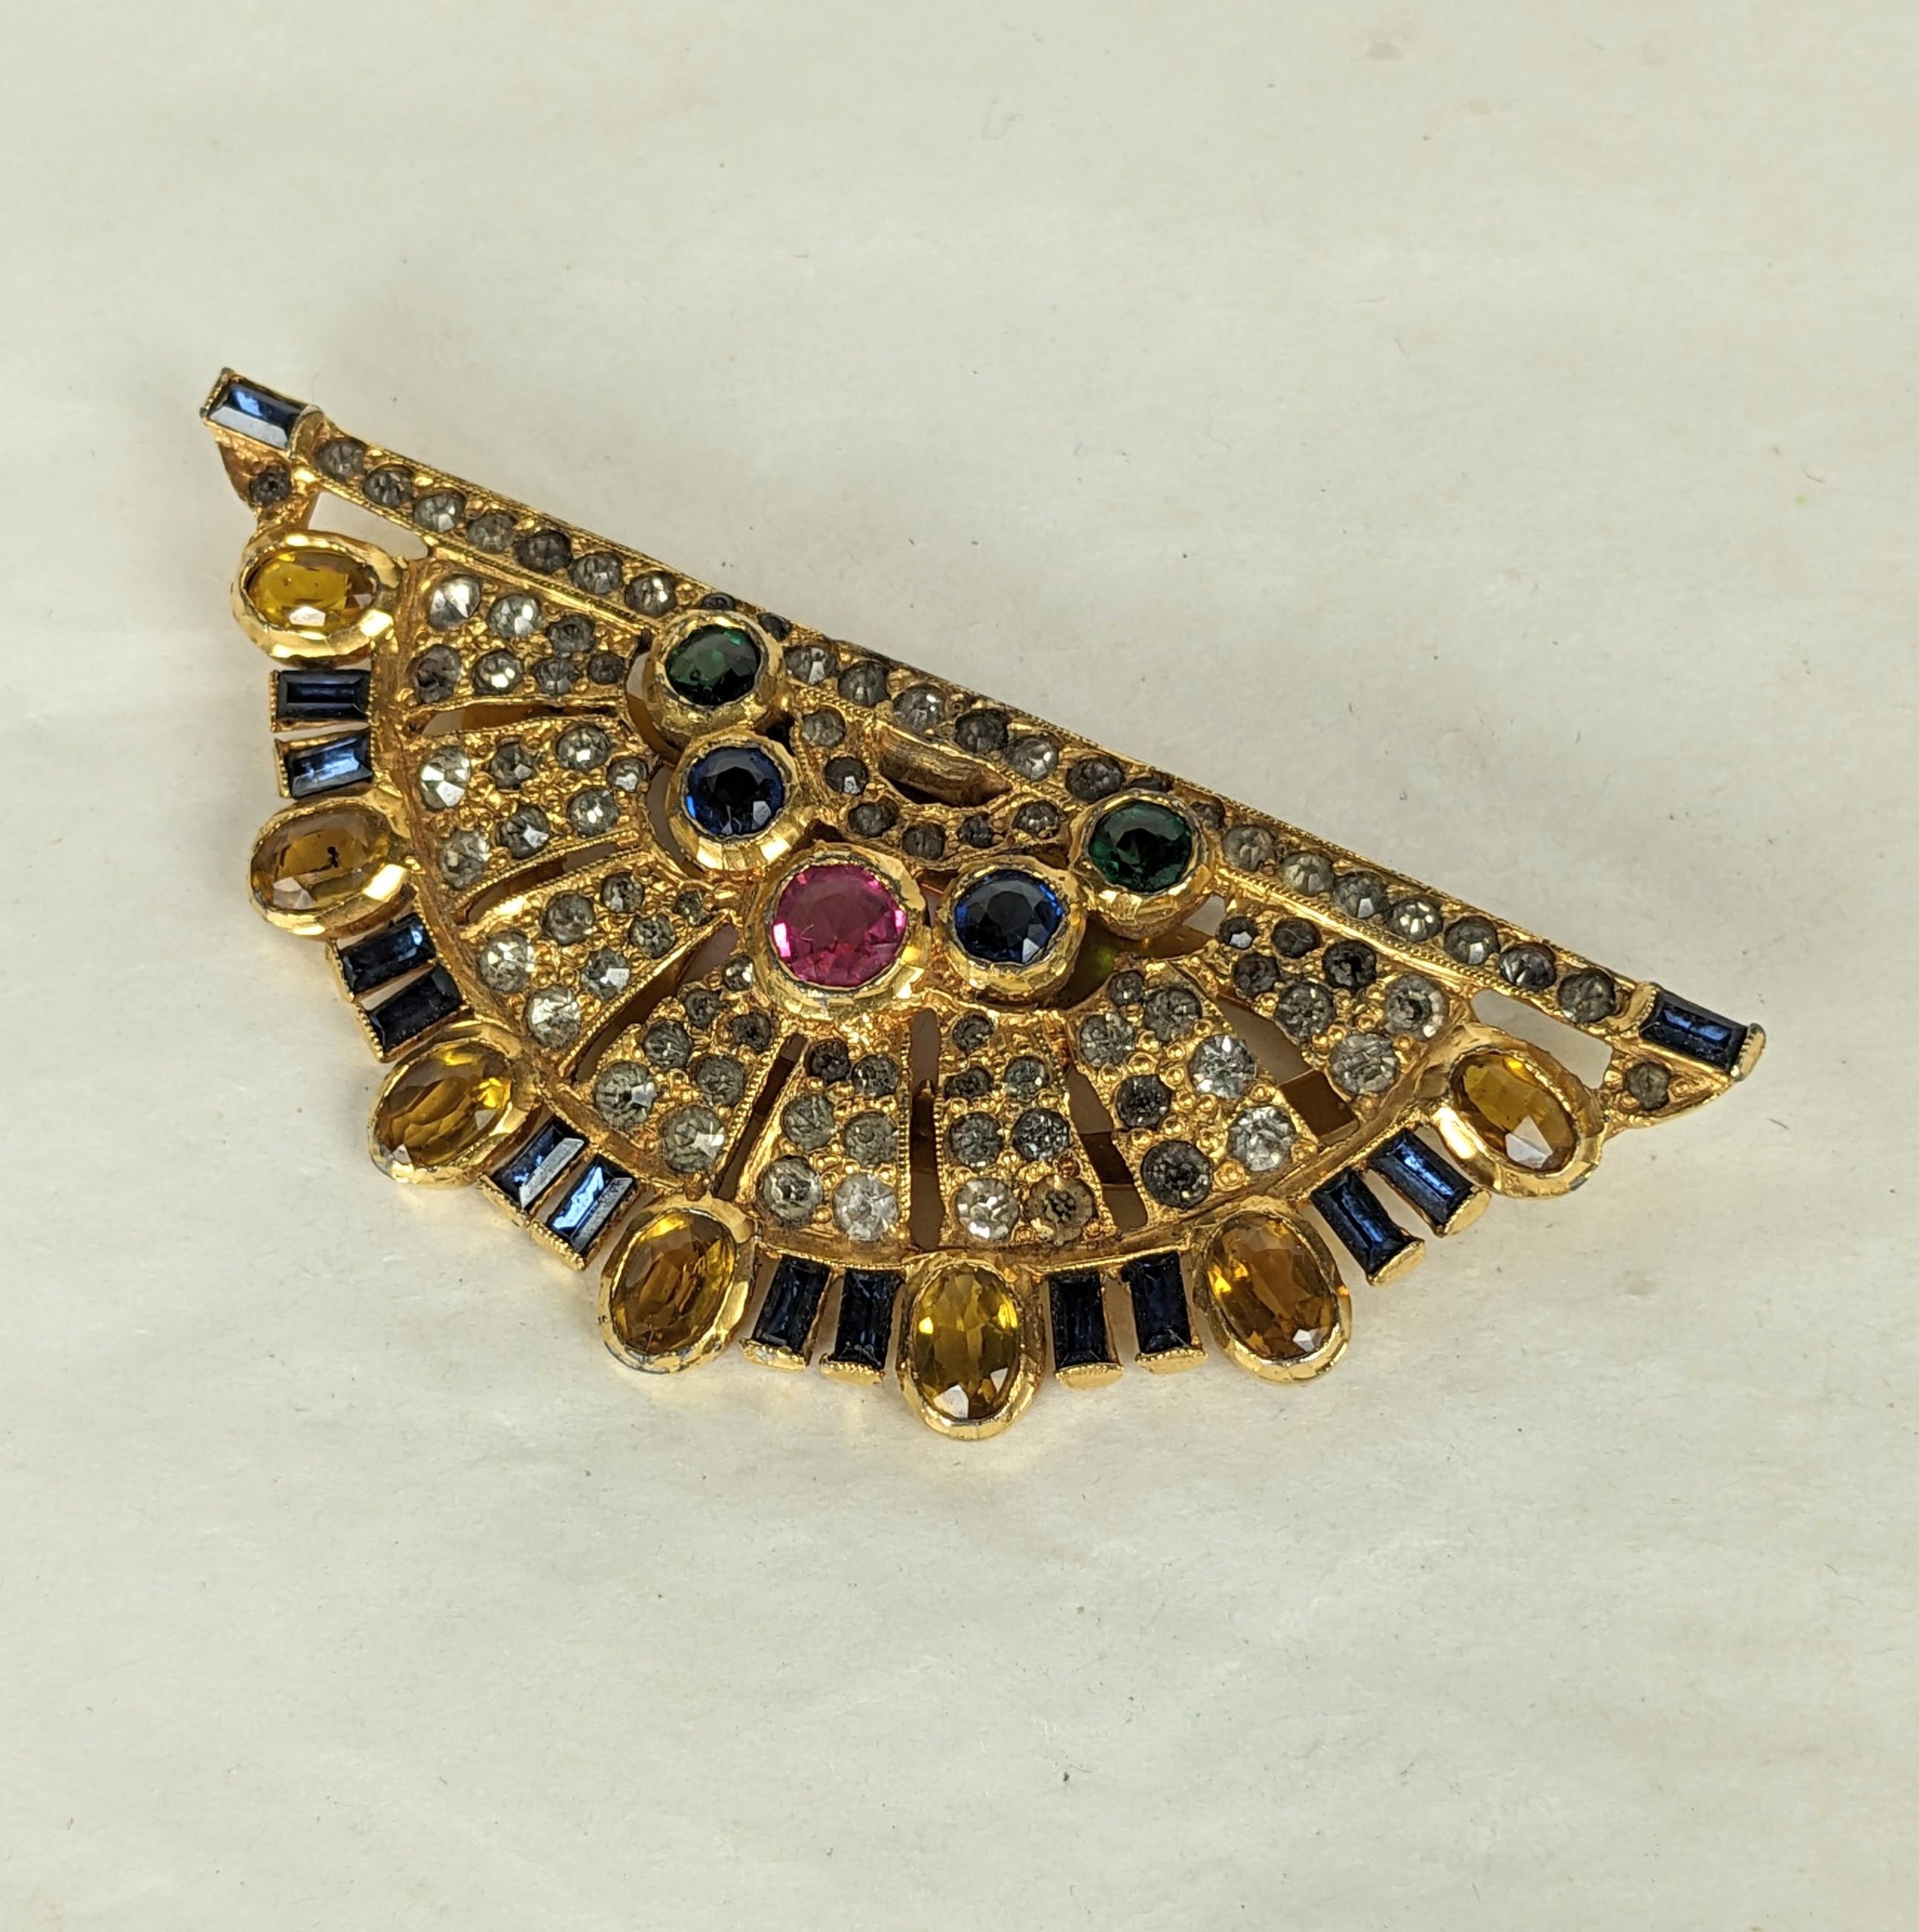 Ralph Derosa intricate Art Deco fan shape lapel clip brooch composed of faux sapphire baguettes, oval and round faceted faux topaz, pink tourmaline and sapphires on a fine crystal rhinestone  pave ground. Signed R Derosa.  Excellent Condition, Clip